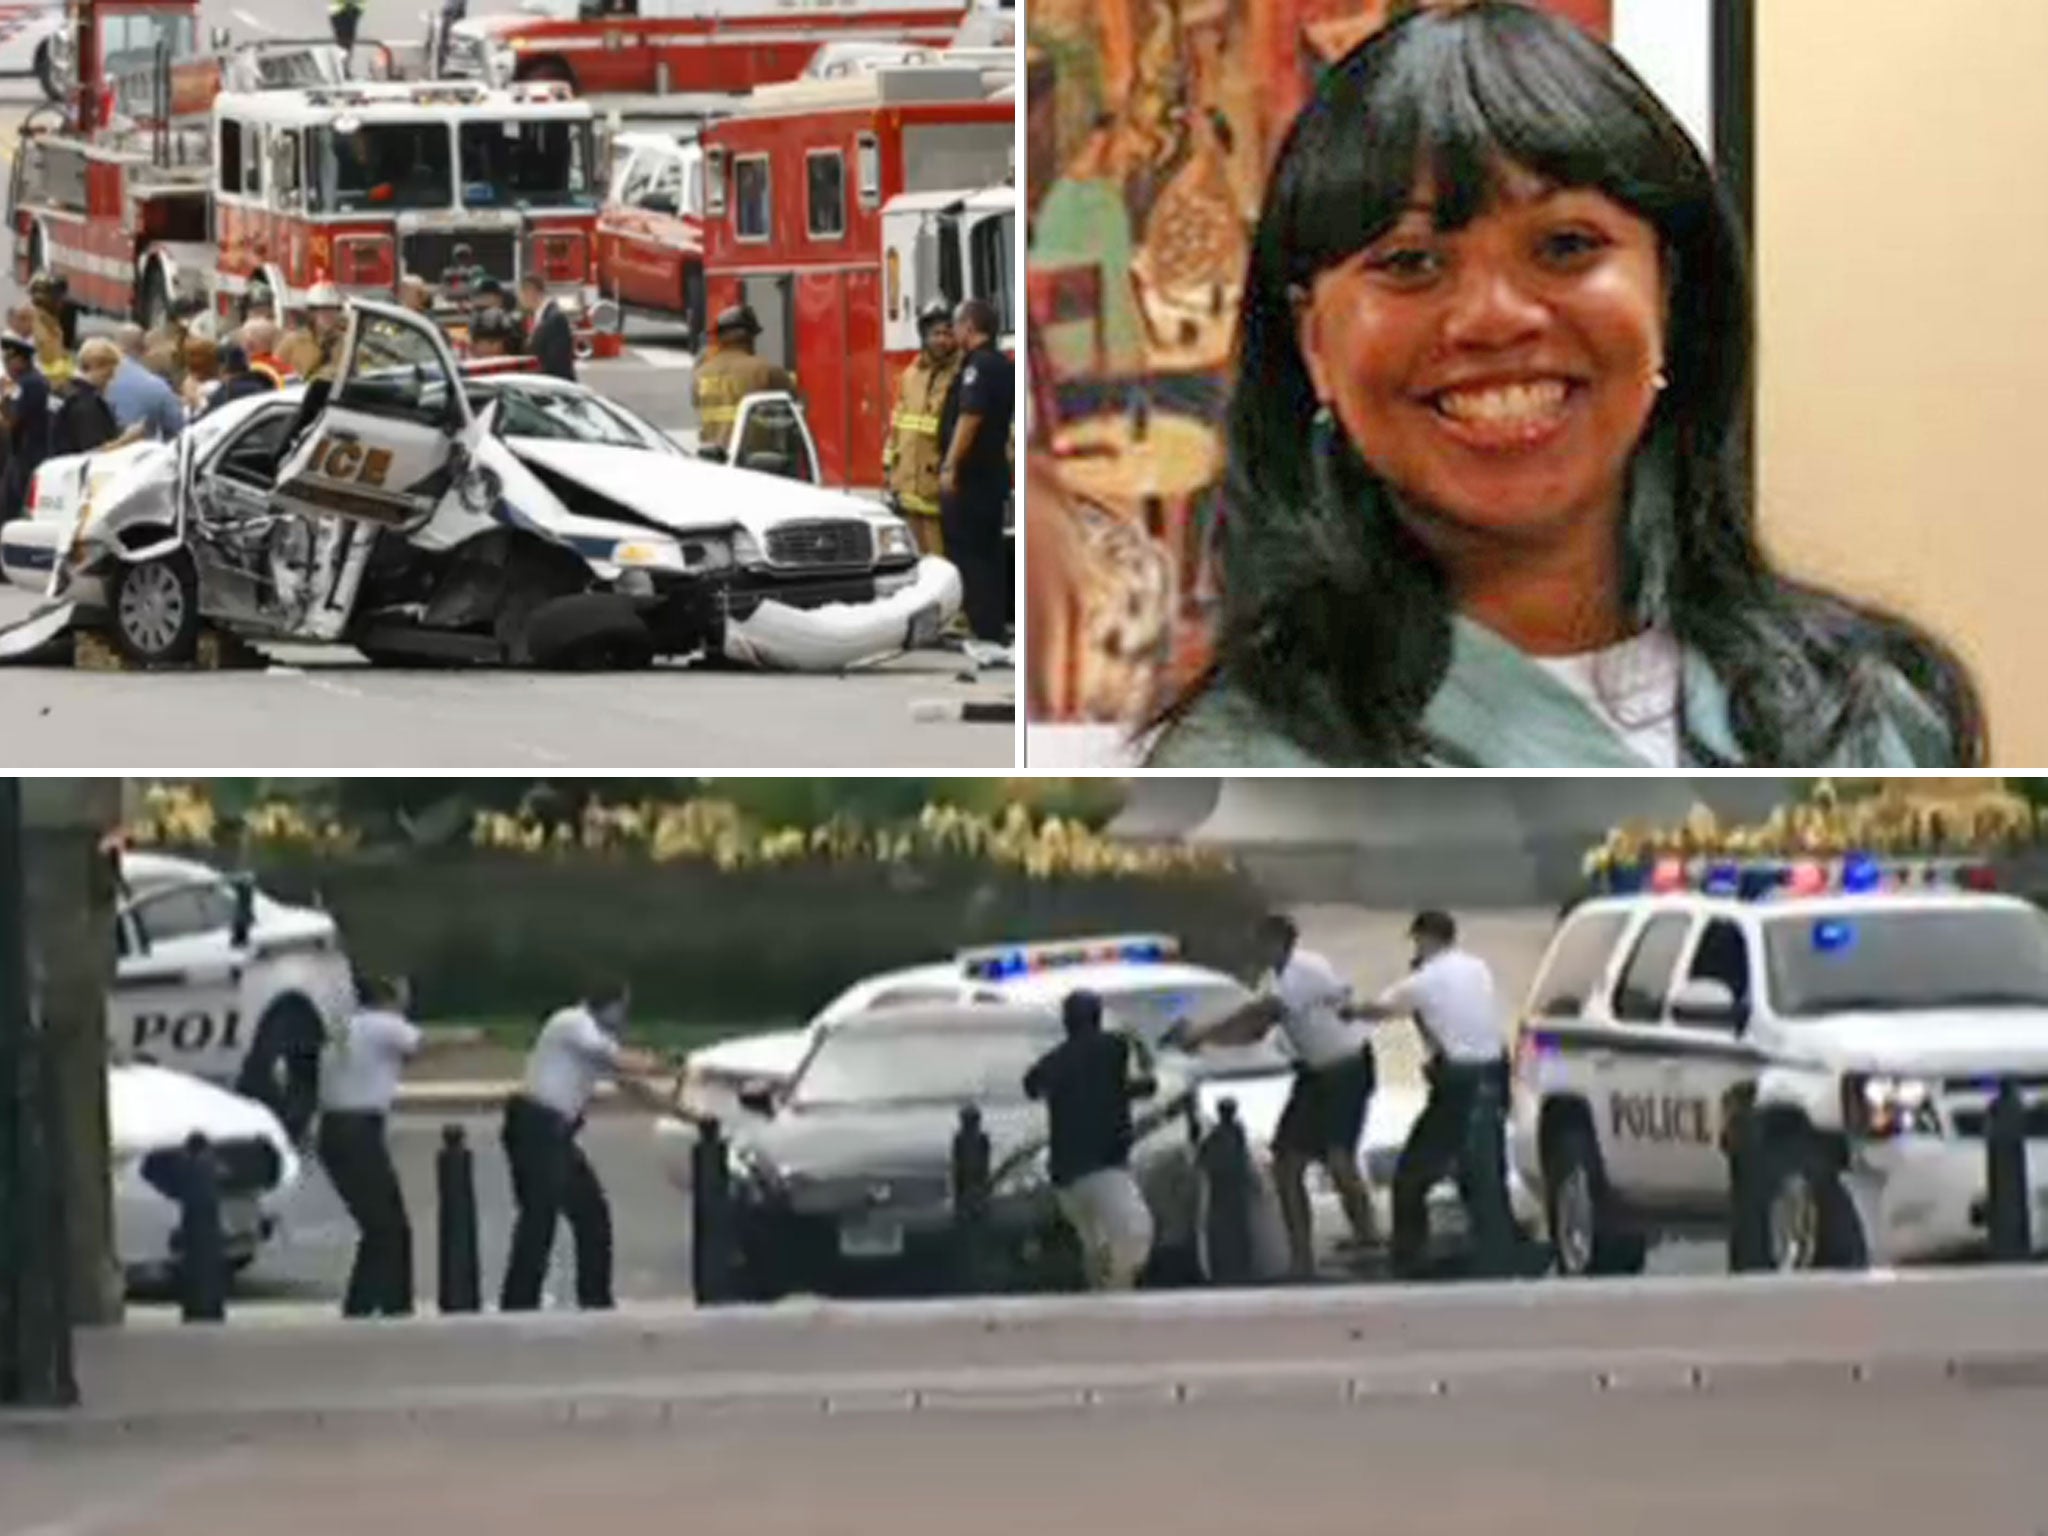 Capitol car chase in Washington: Top left: a smashed US Capitol Hill Police vehicle; top right: Miriam Carey, the mom shot dead by police; bottom: Carey's attempt to ram her car through a White House barrier